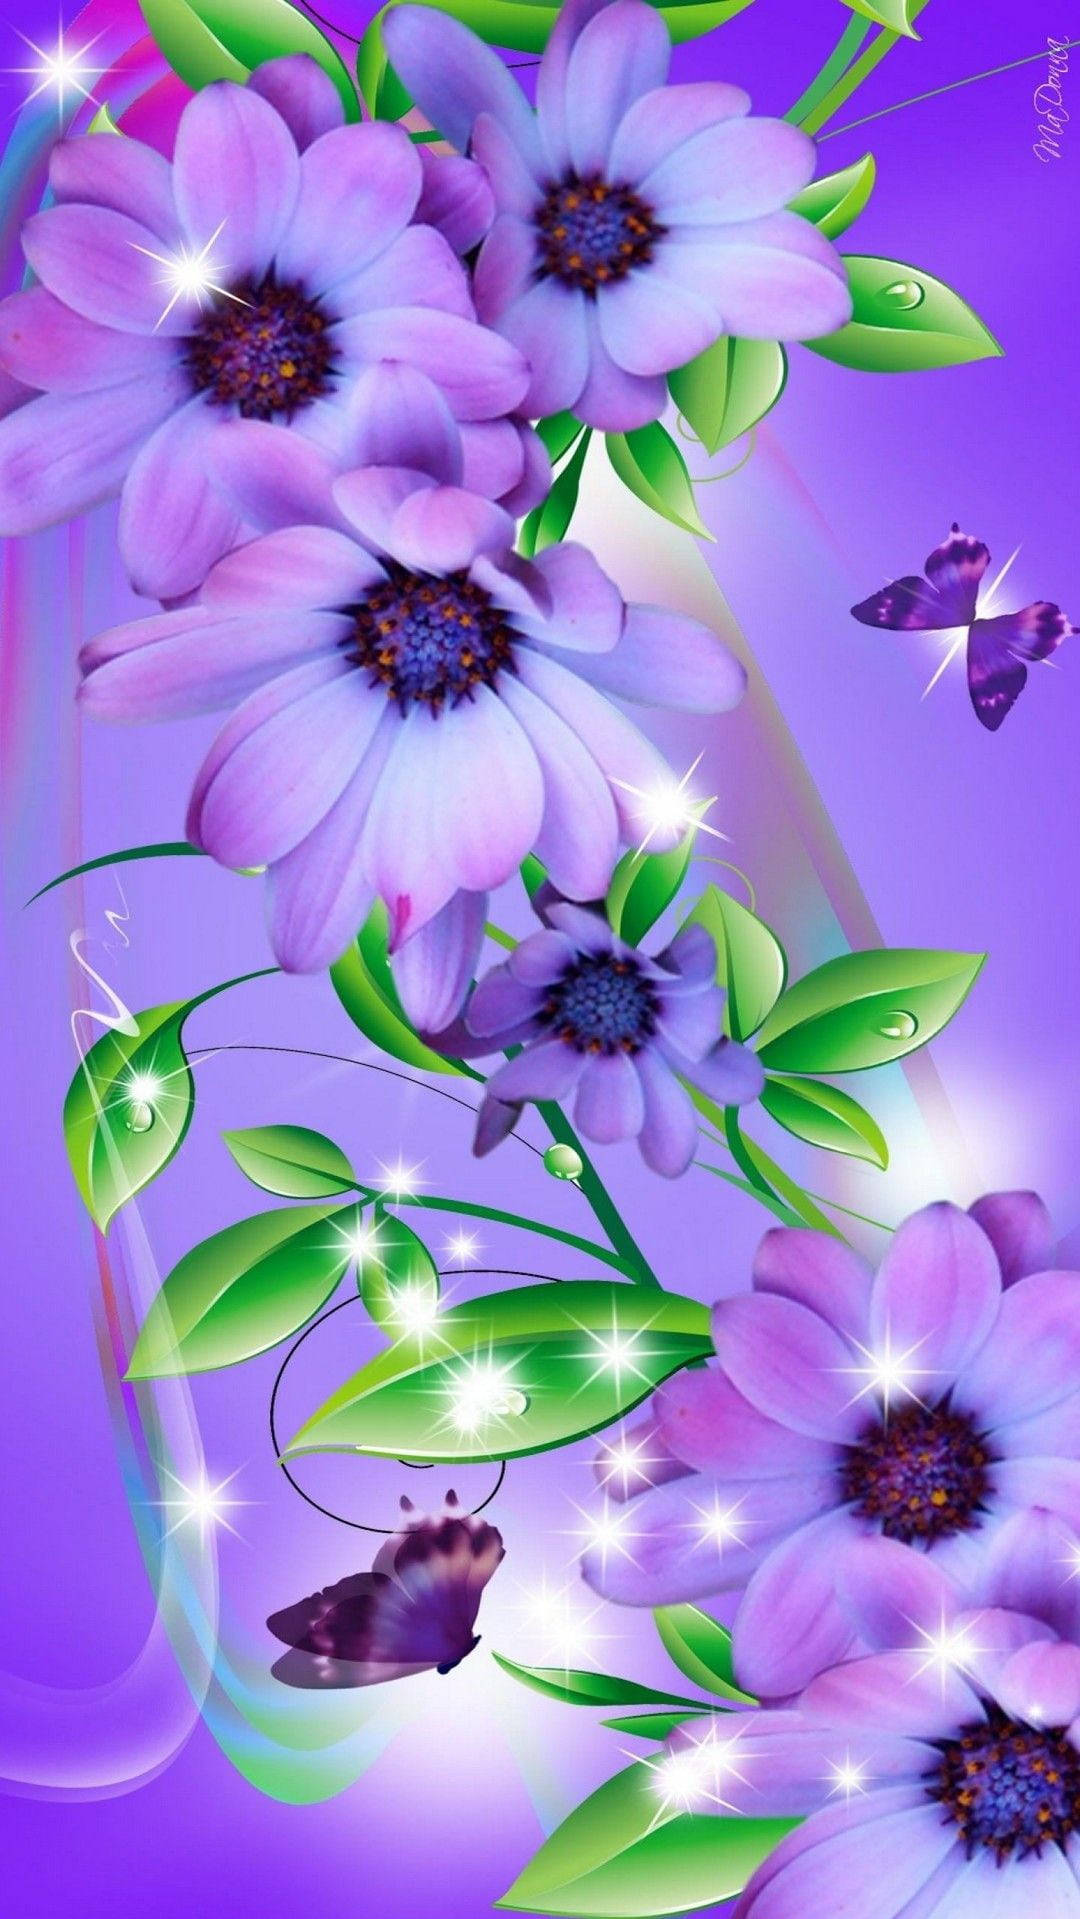 Sparkly Purple Daisies Flower Mobile Background